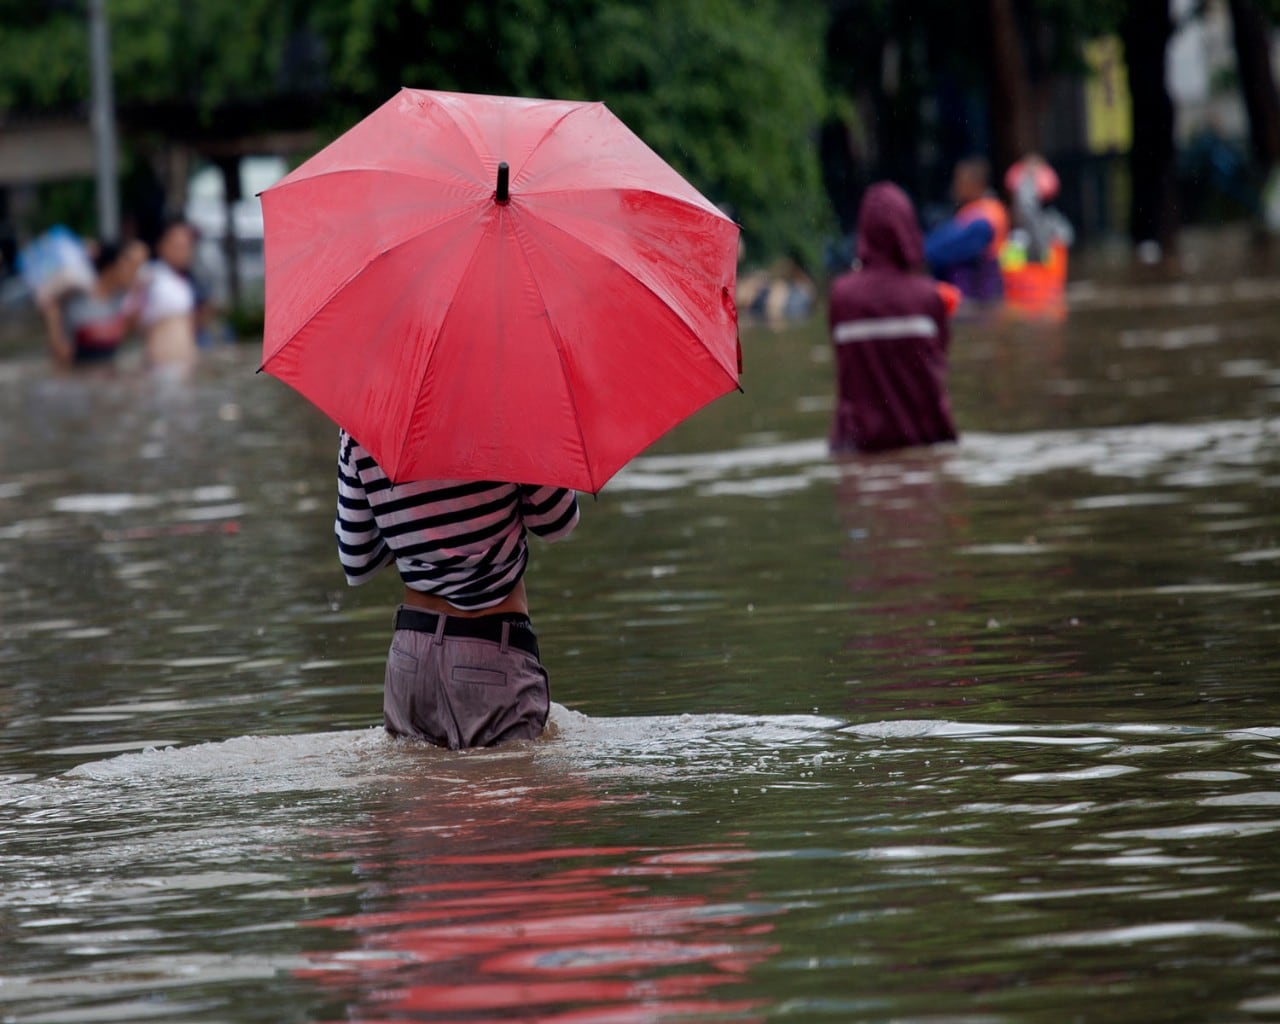 A person wading through high floodwaters carrying a red umbrella